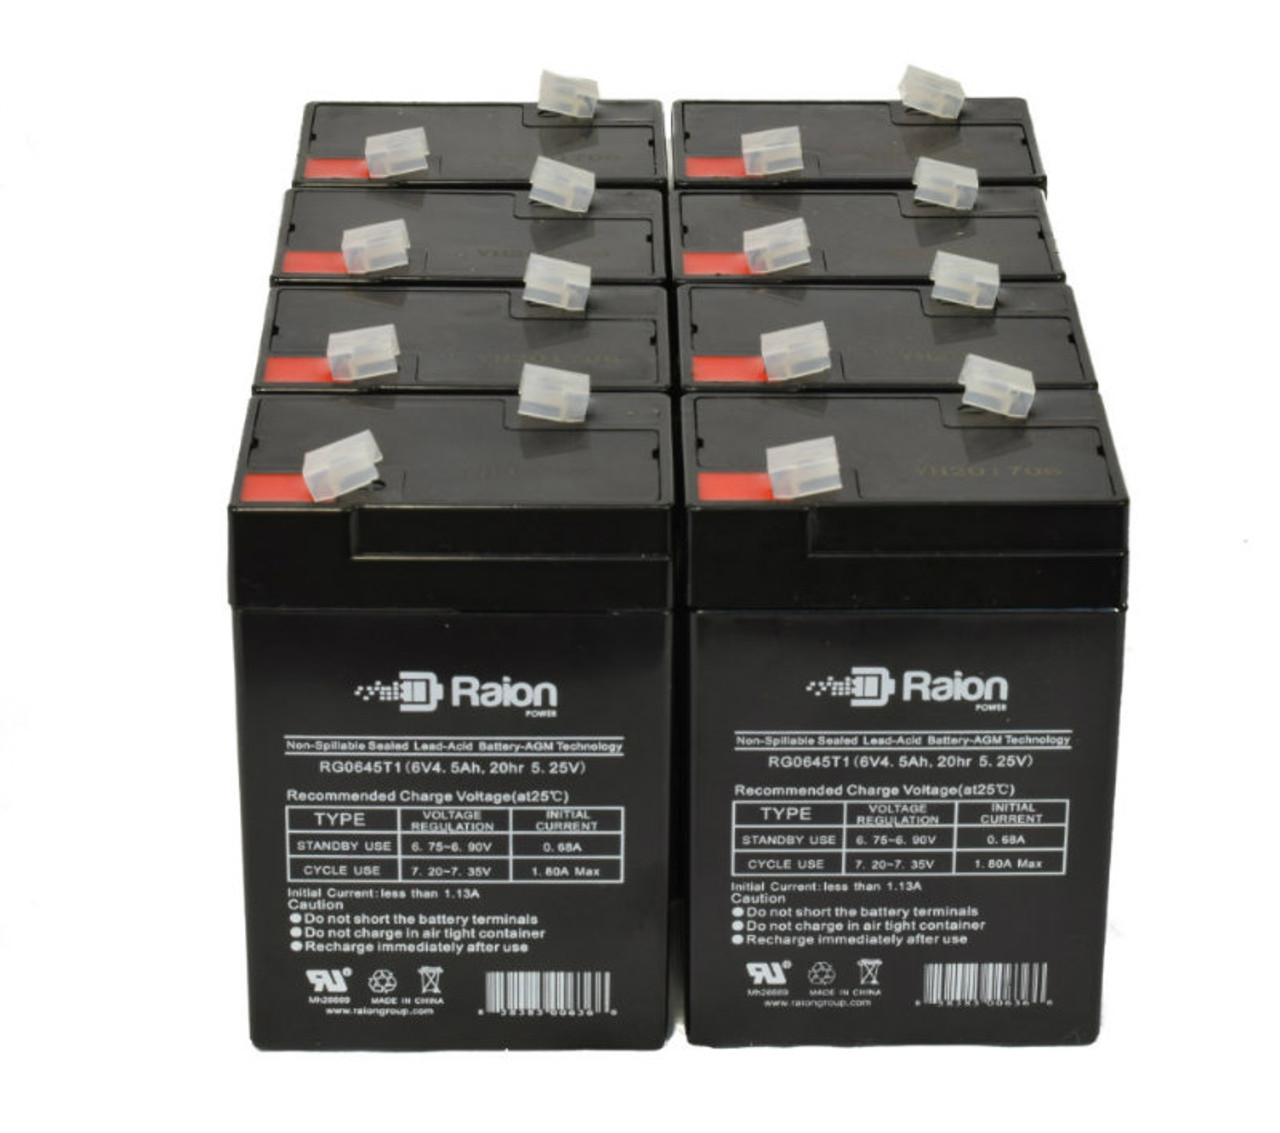 Raion Power RG0645T1 6V 4.5Ah Replacement Medical Equipment Battery for Quest Medical IV Pump - 8 Pack